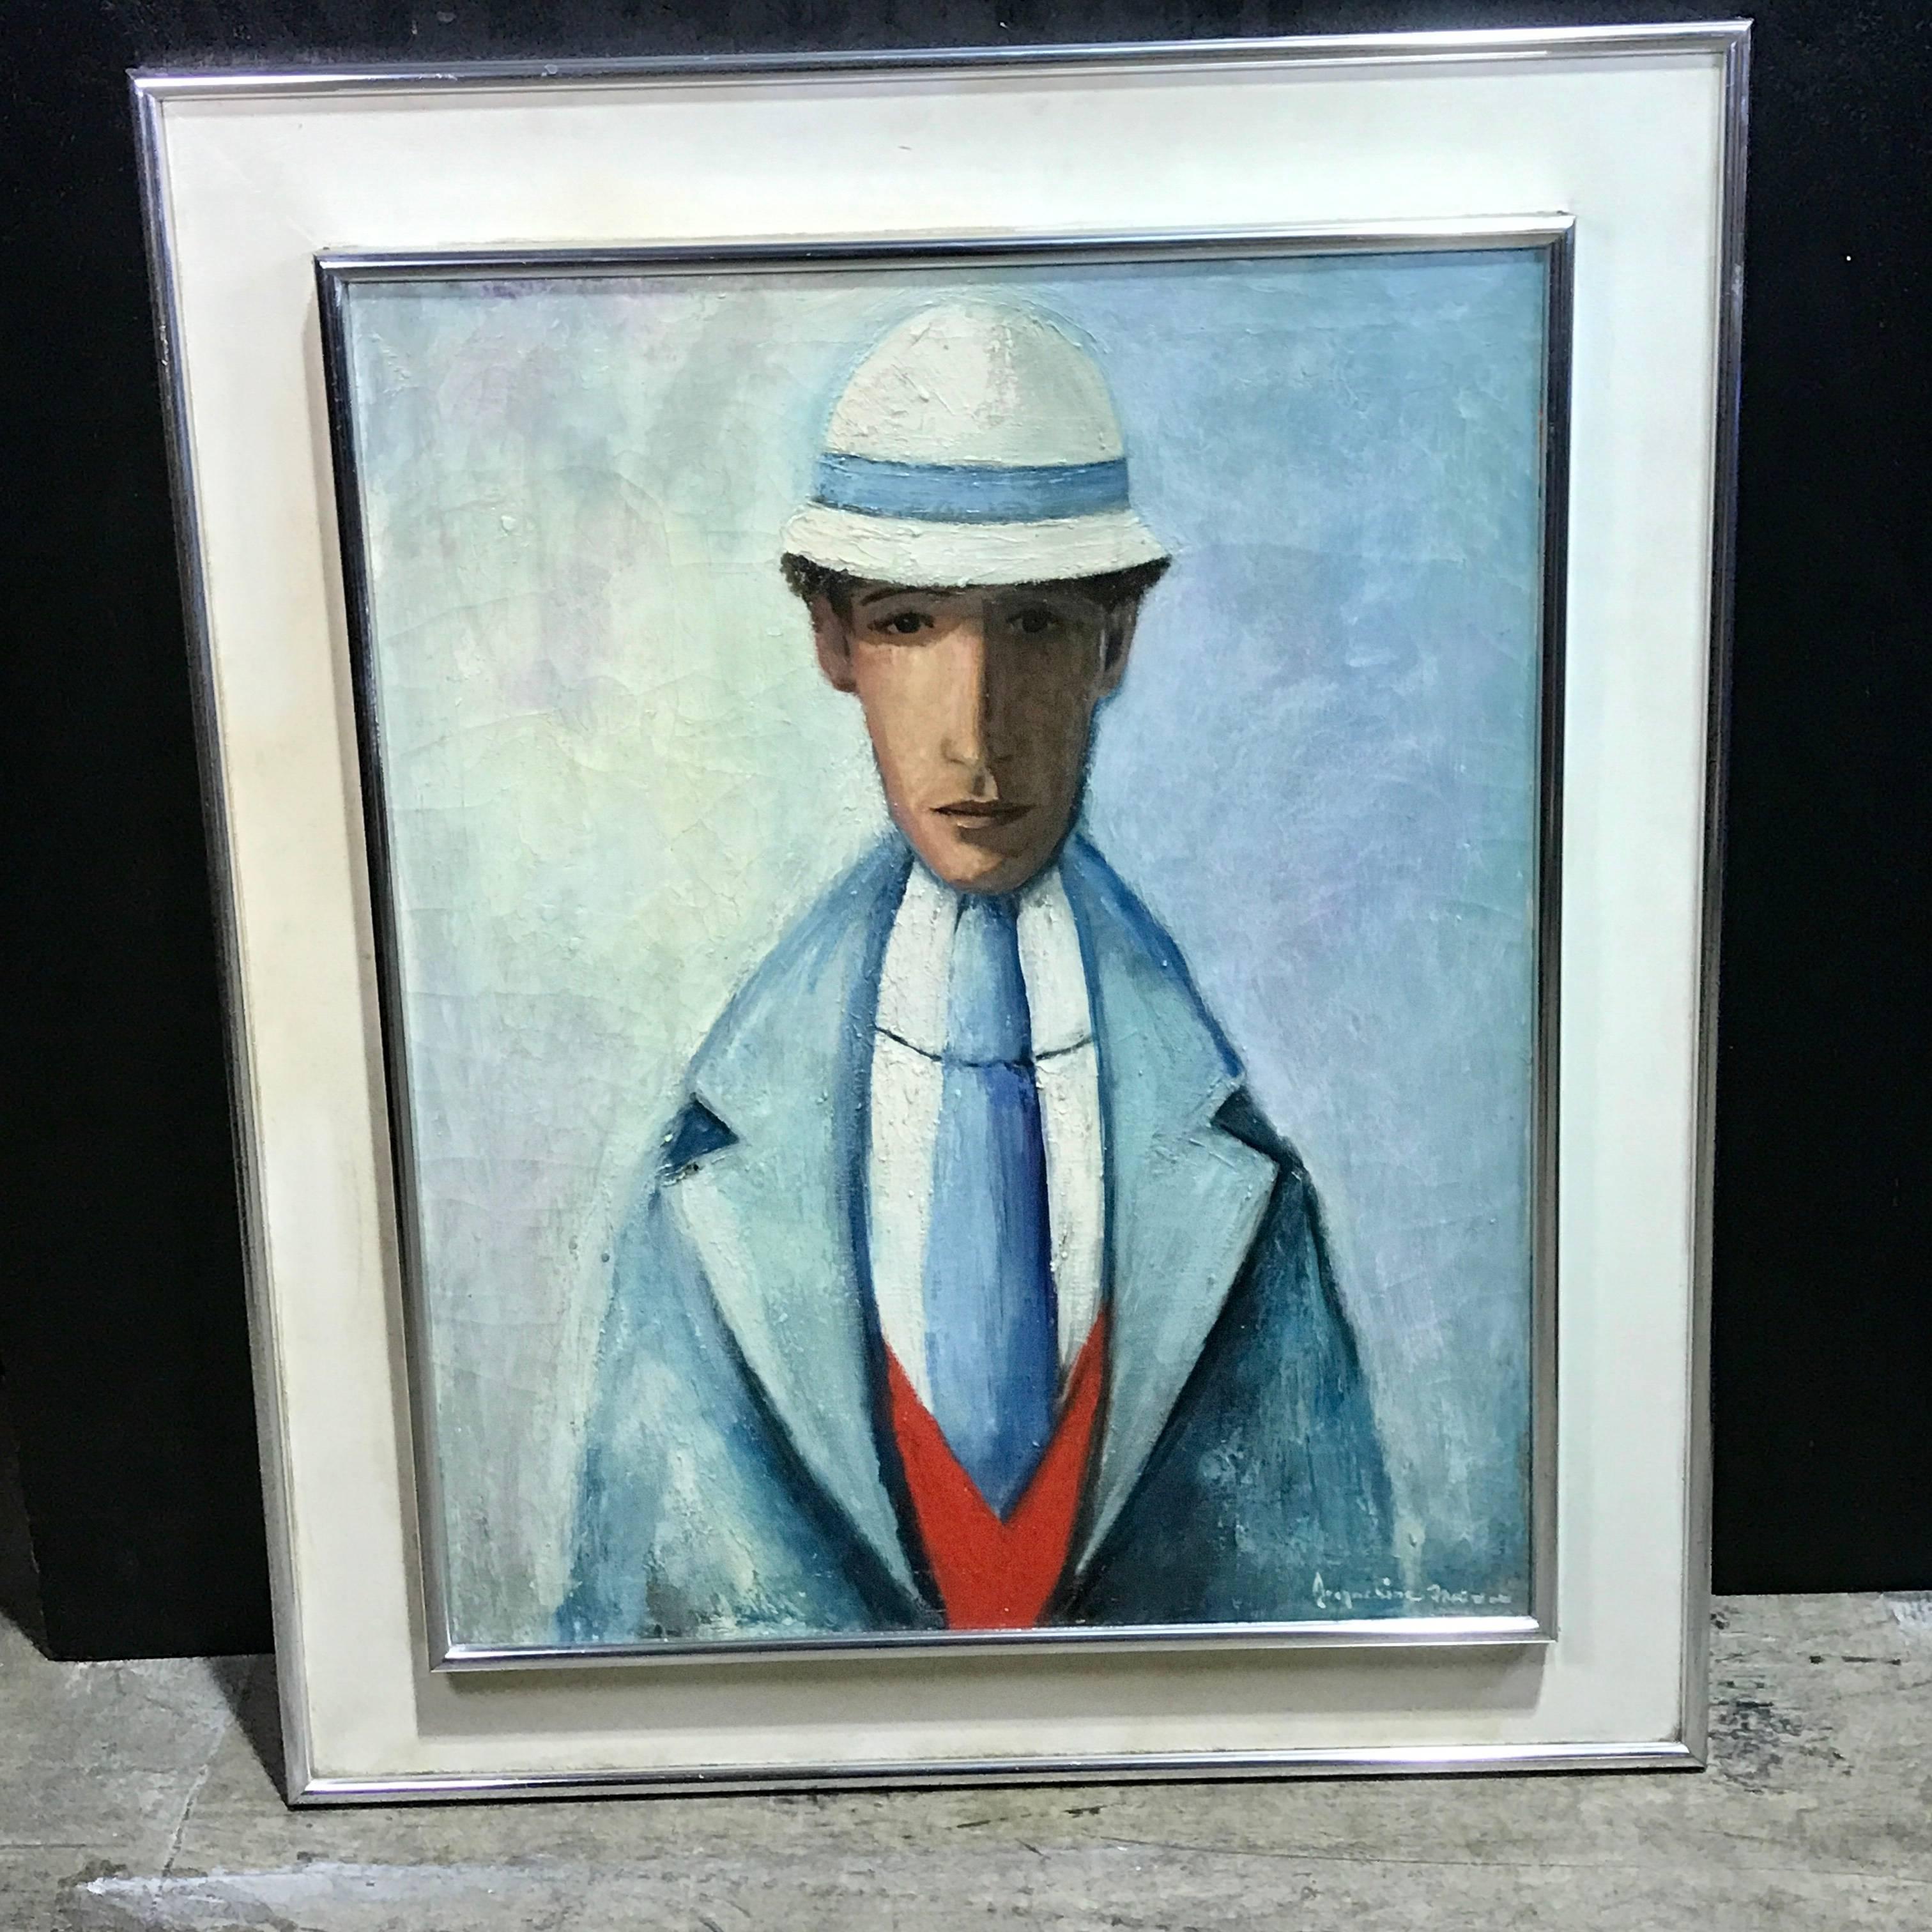 French Midcentury Portrait of a Man by Jacqueline Fromenteau 1